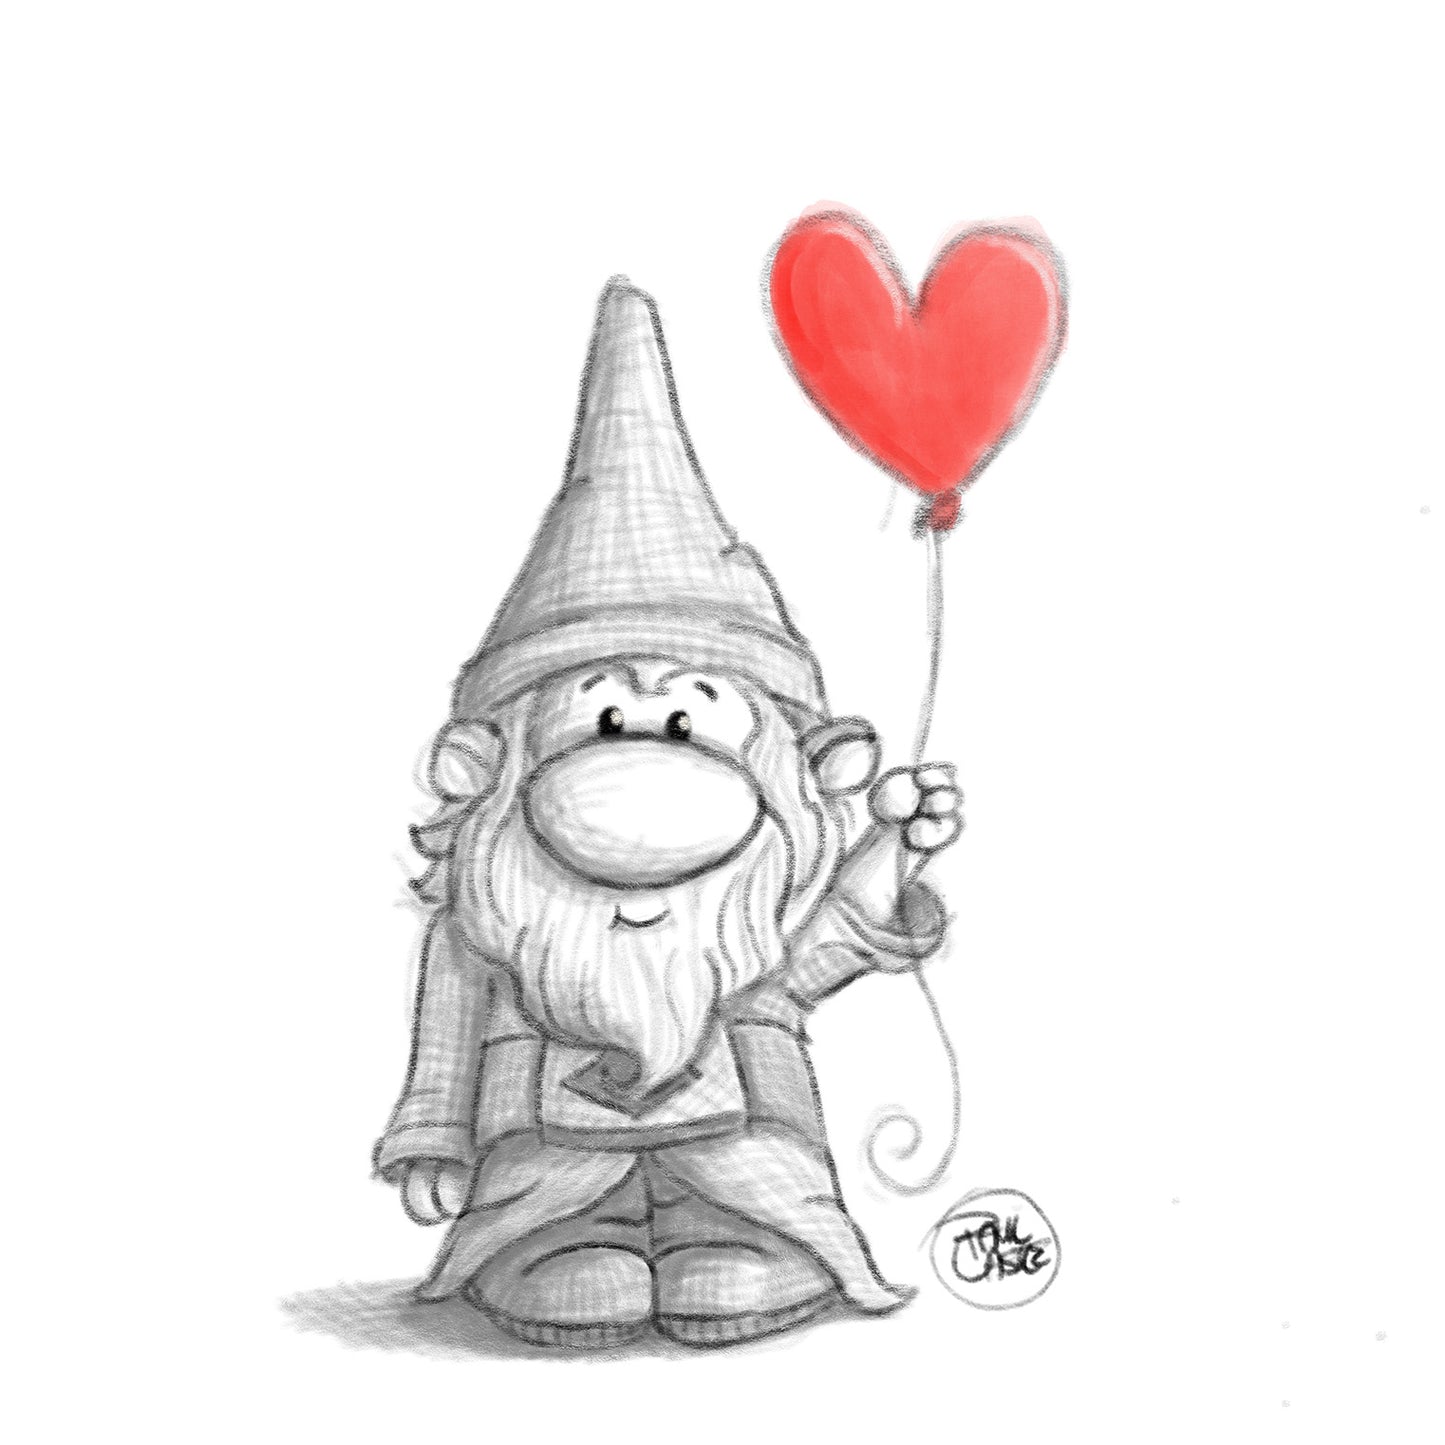 Gnome is Where the Heart is - Kunstdruck